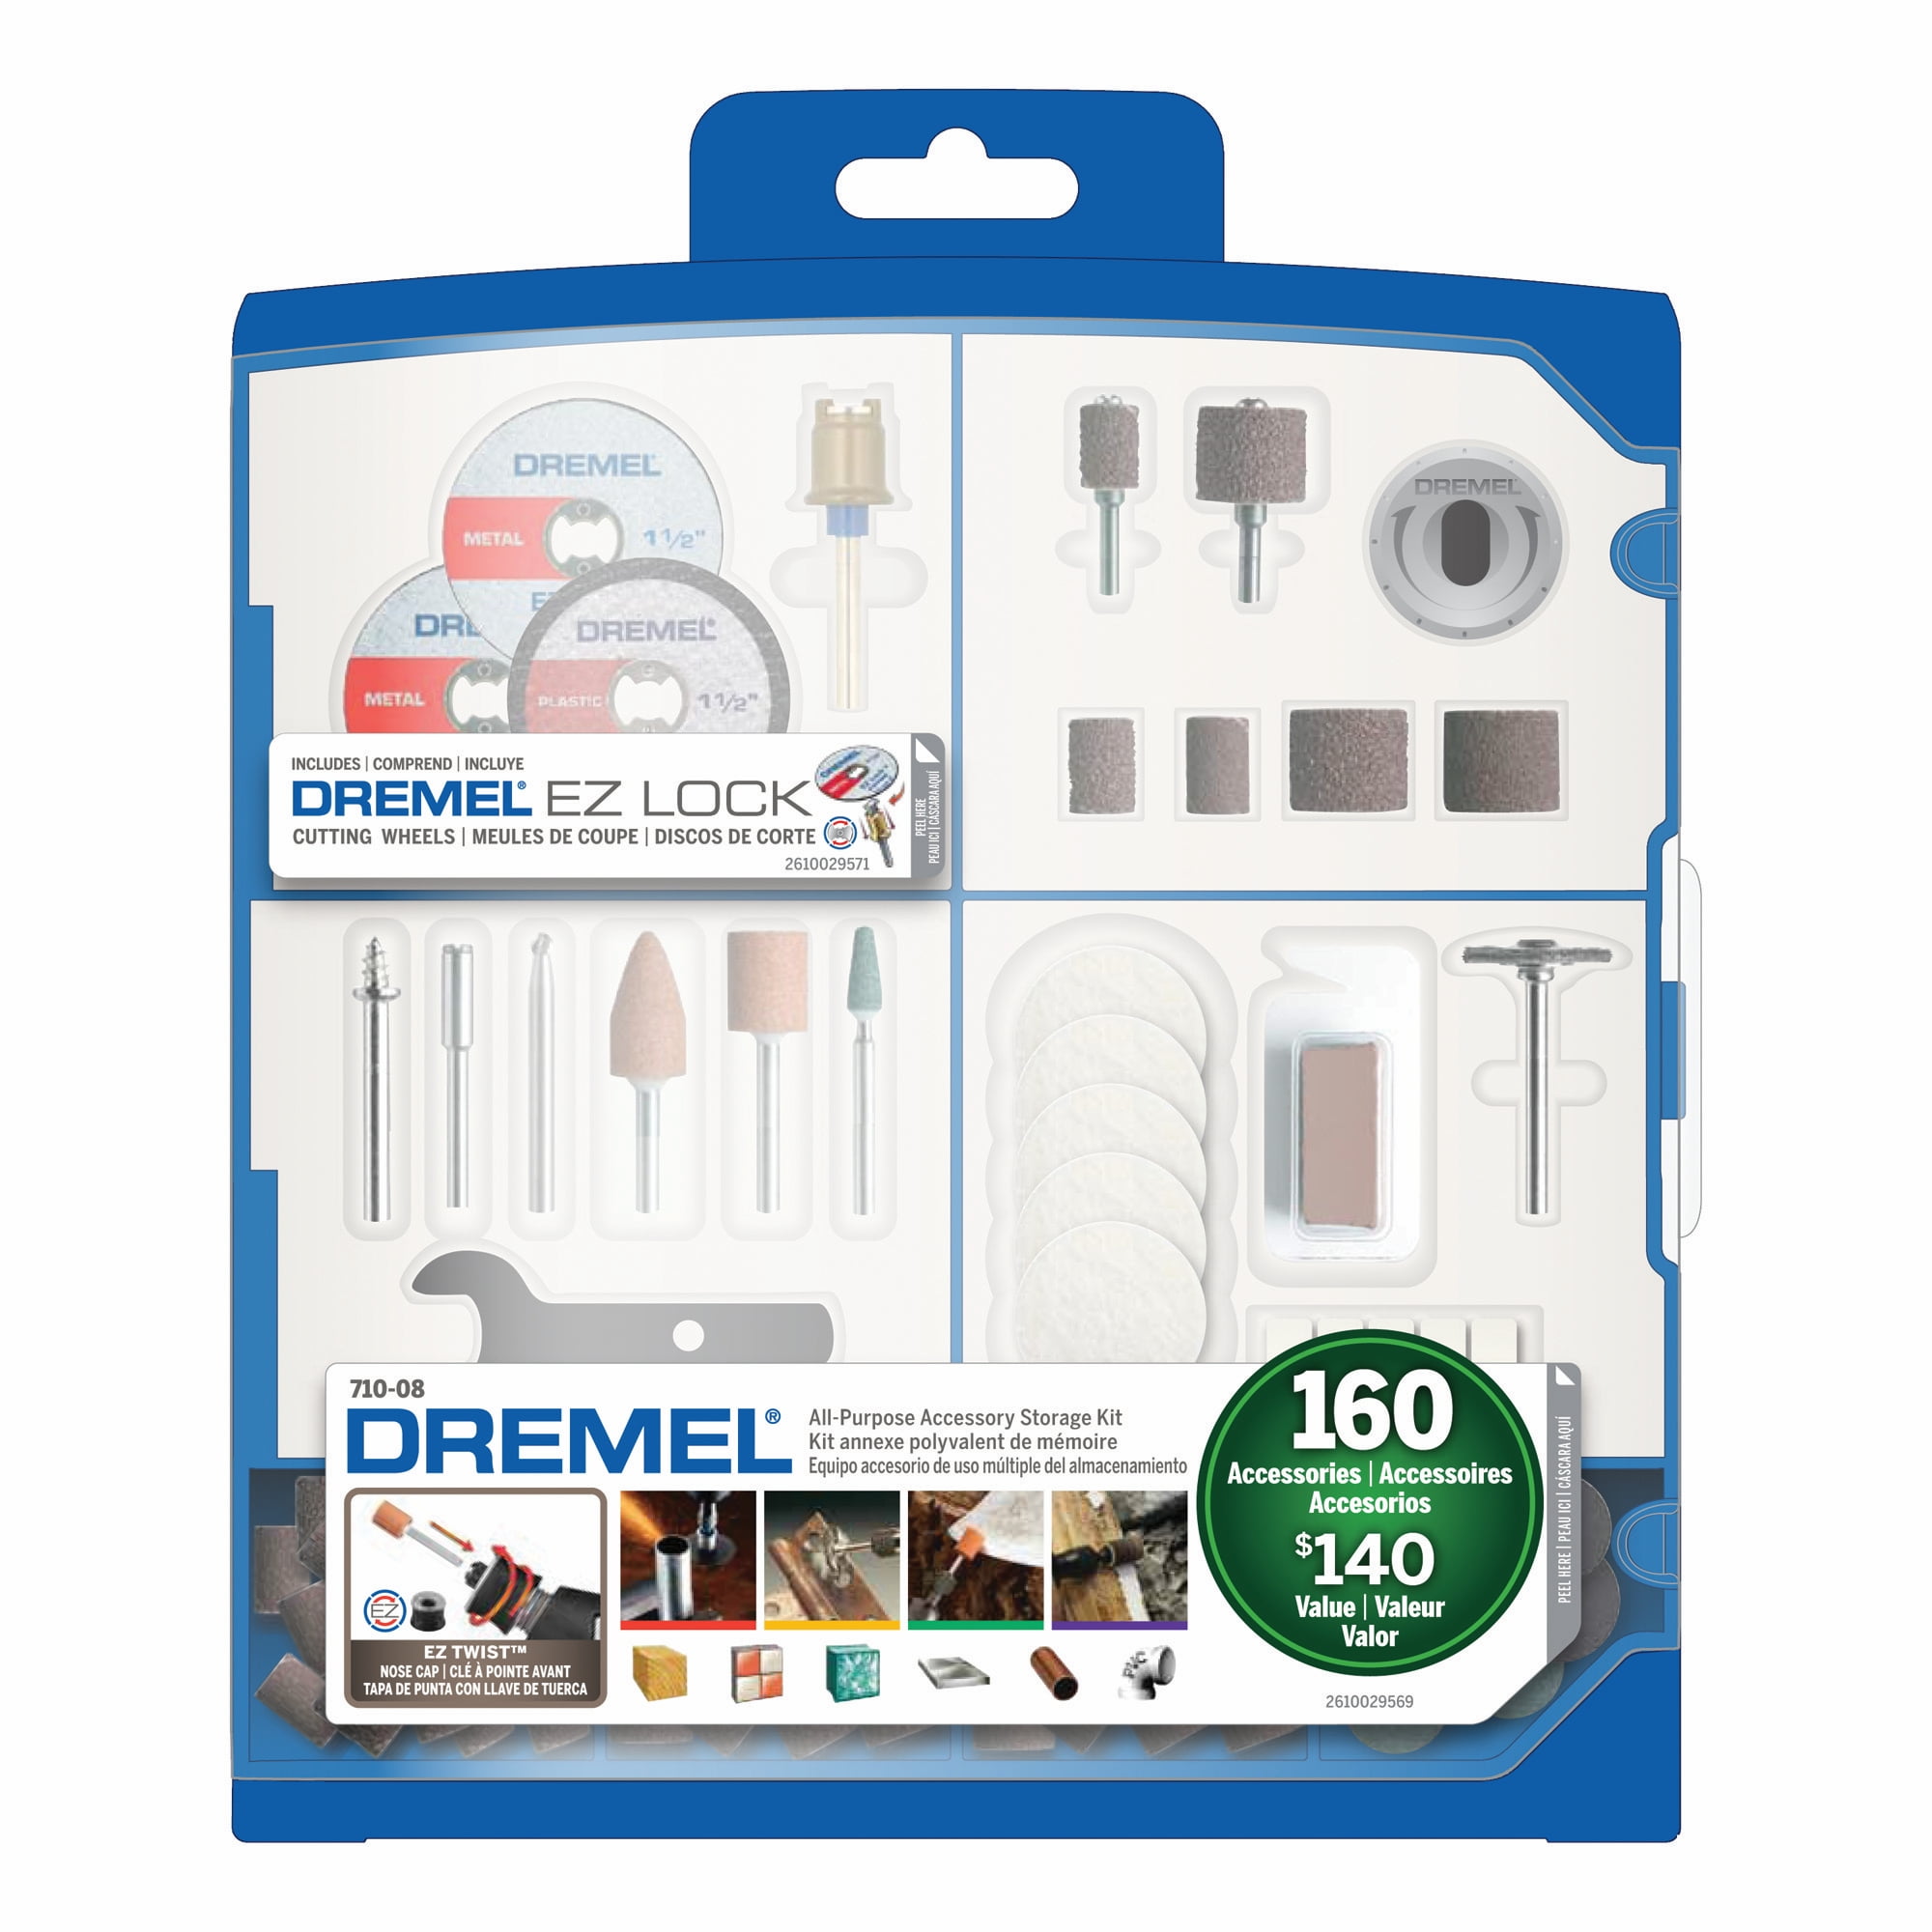 Dremel 8250 Cordless Brushless Rotary Tool Kit and the 710-08 160 Piece  Rotary Tool Accessory Set